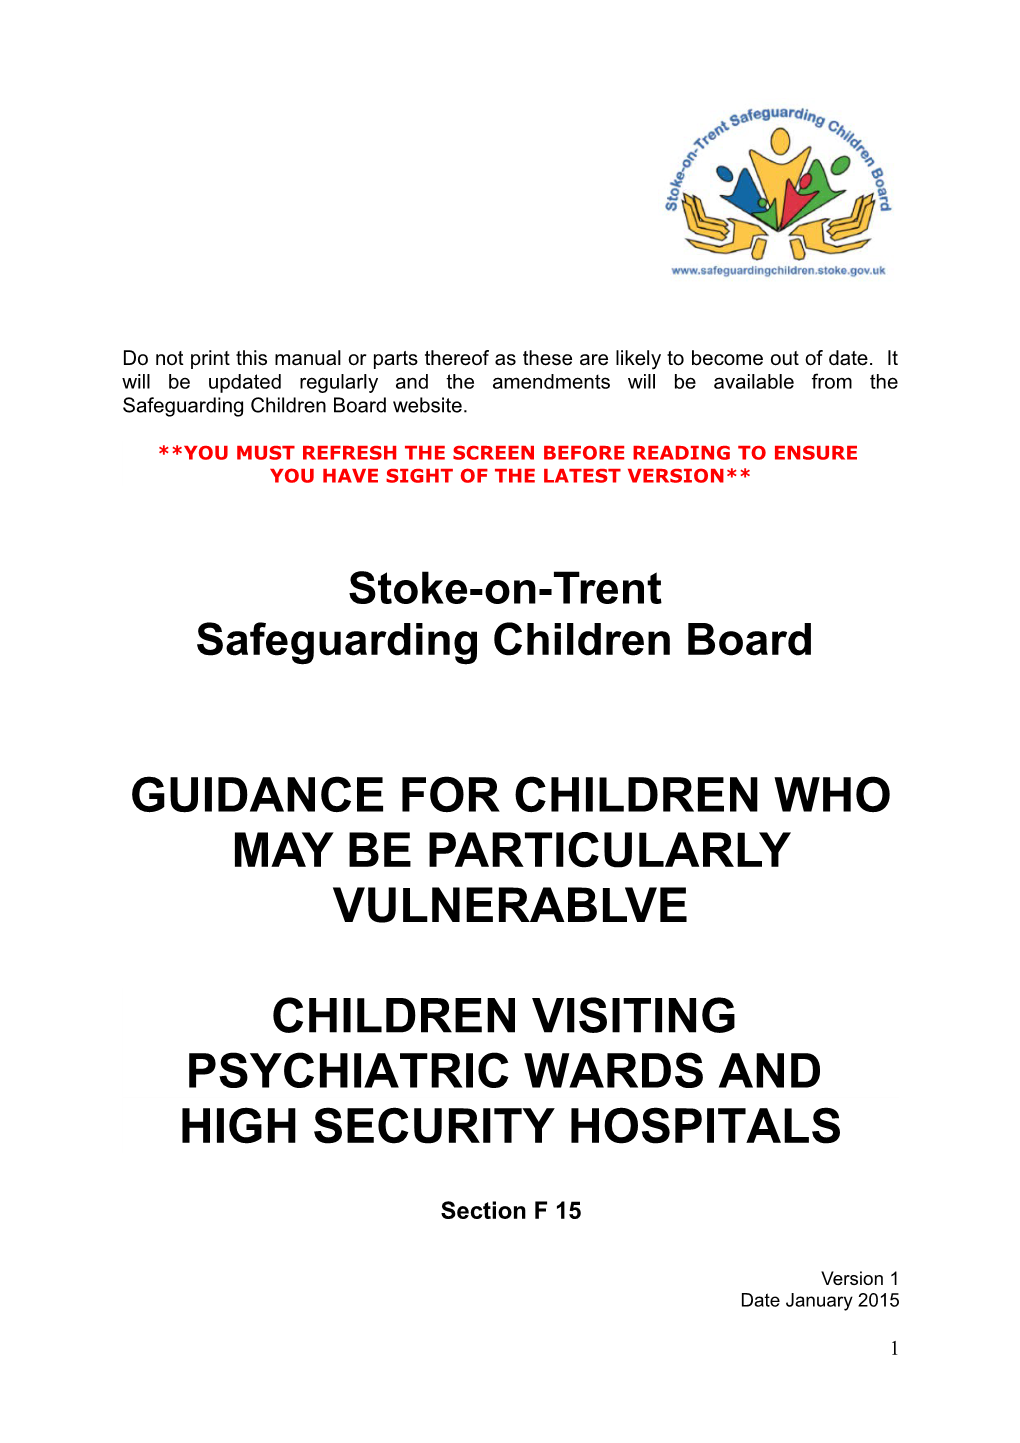 Children Visiting Psychiatric Wards and Secure Hospitals